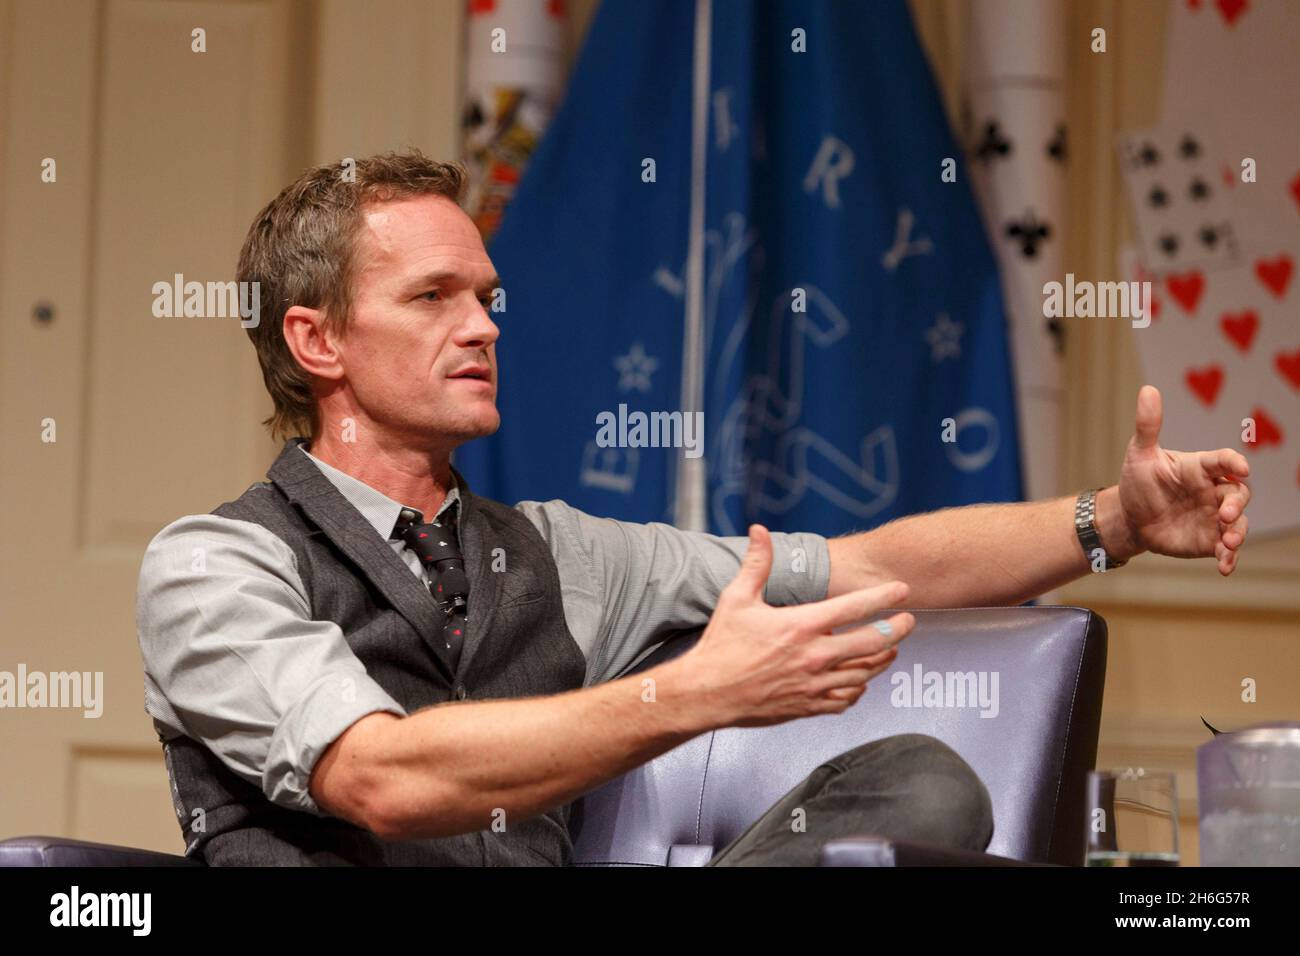 Washington, United States of America. 11 September, 2019. Actor Neil Patrick Harris opens the National Book Festival Presents series during a talk with Library Chief Communications Officer Roswell Encina, September 11, 2019 in Washington, D.C.  Credit: Shawn Miller/Library of Congress/Alamy Live News Stock Photo